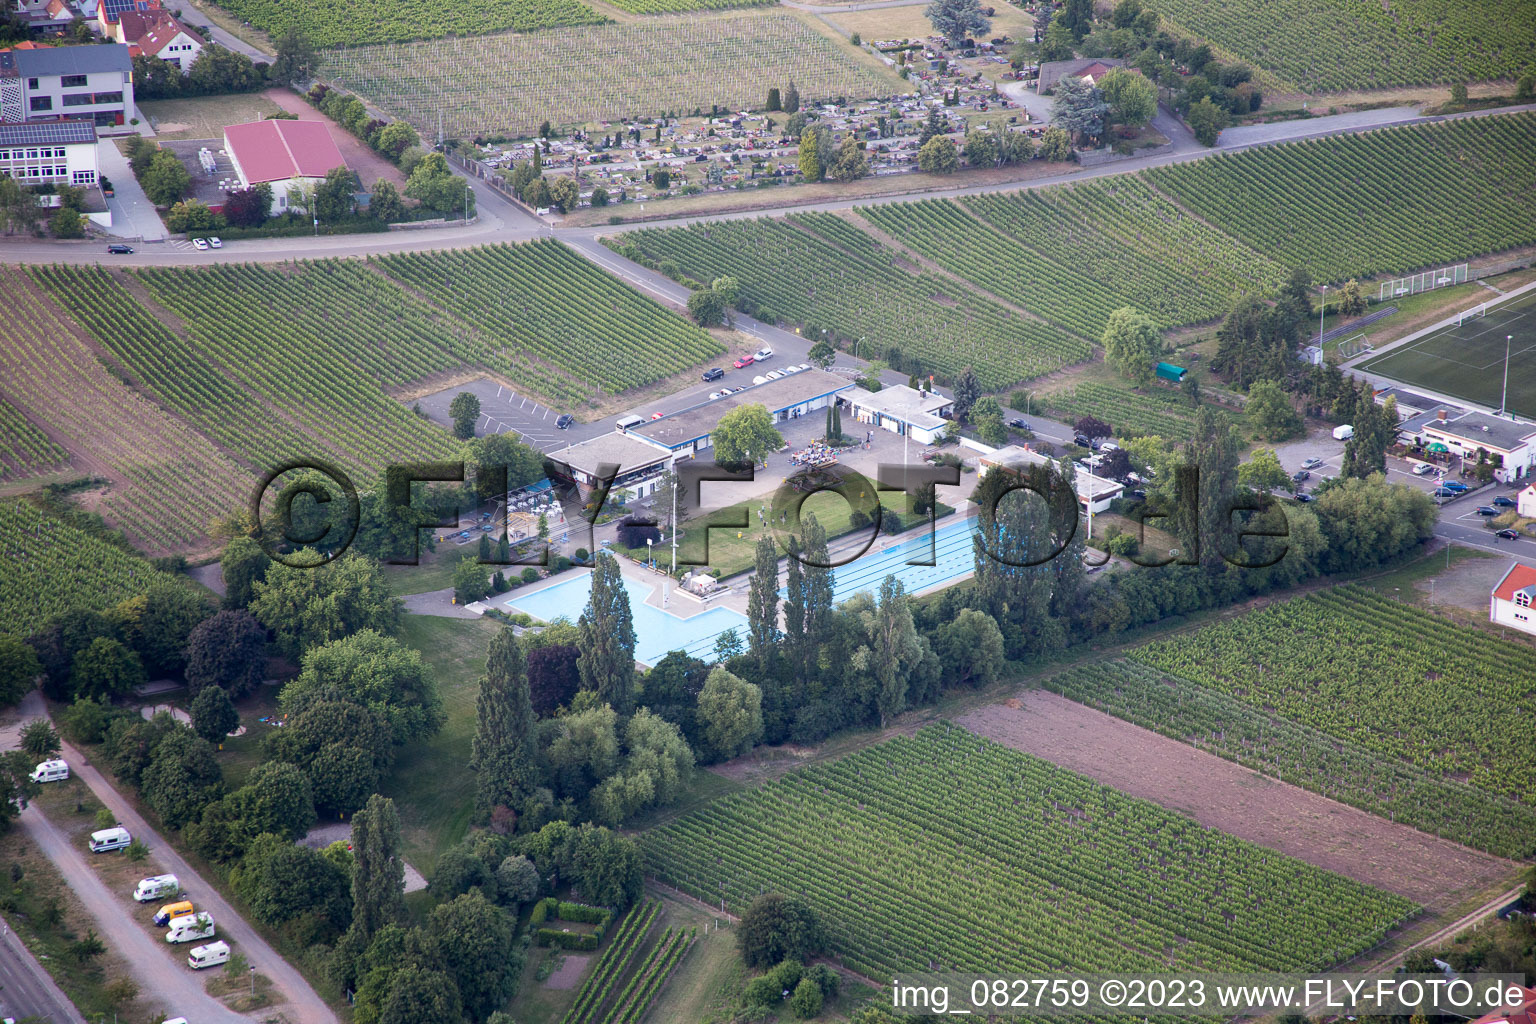 Aerial photograpy of District Hambach an der Weinstraße in Neustadt an der Weinstraße in the state Rhineland-Palatinate, Germany